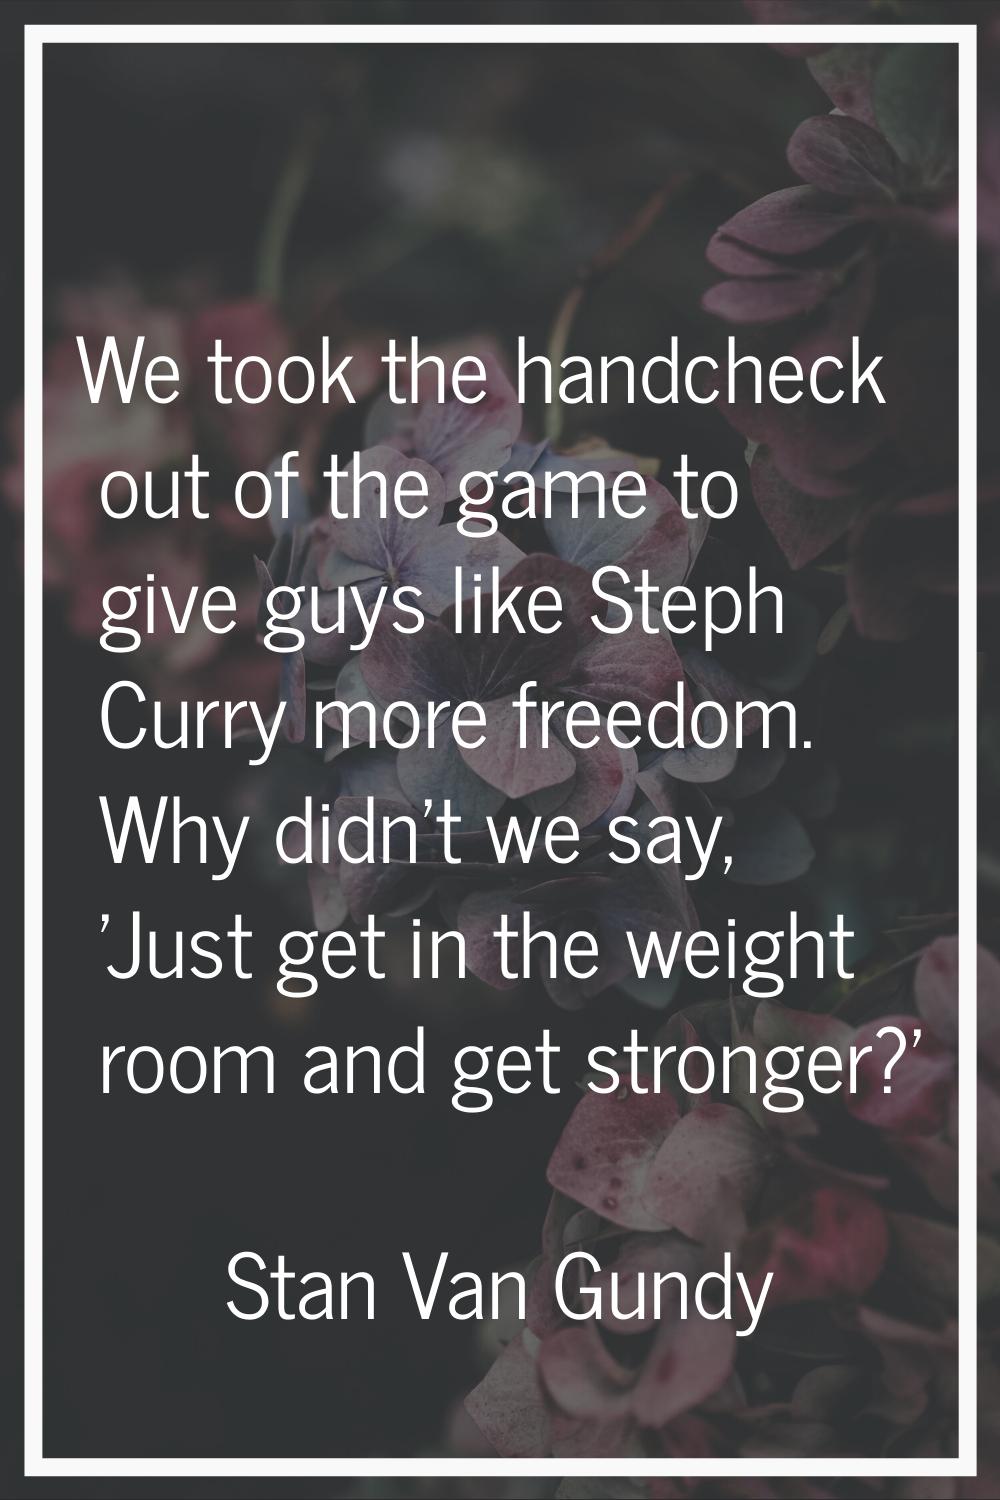 We took the handcheck out of the game to give guys like Steph Curry more freedom. Why didn't we say